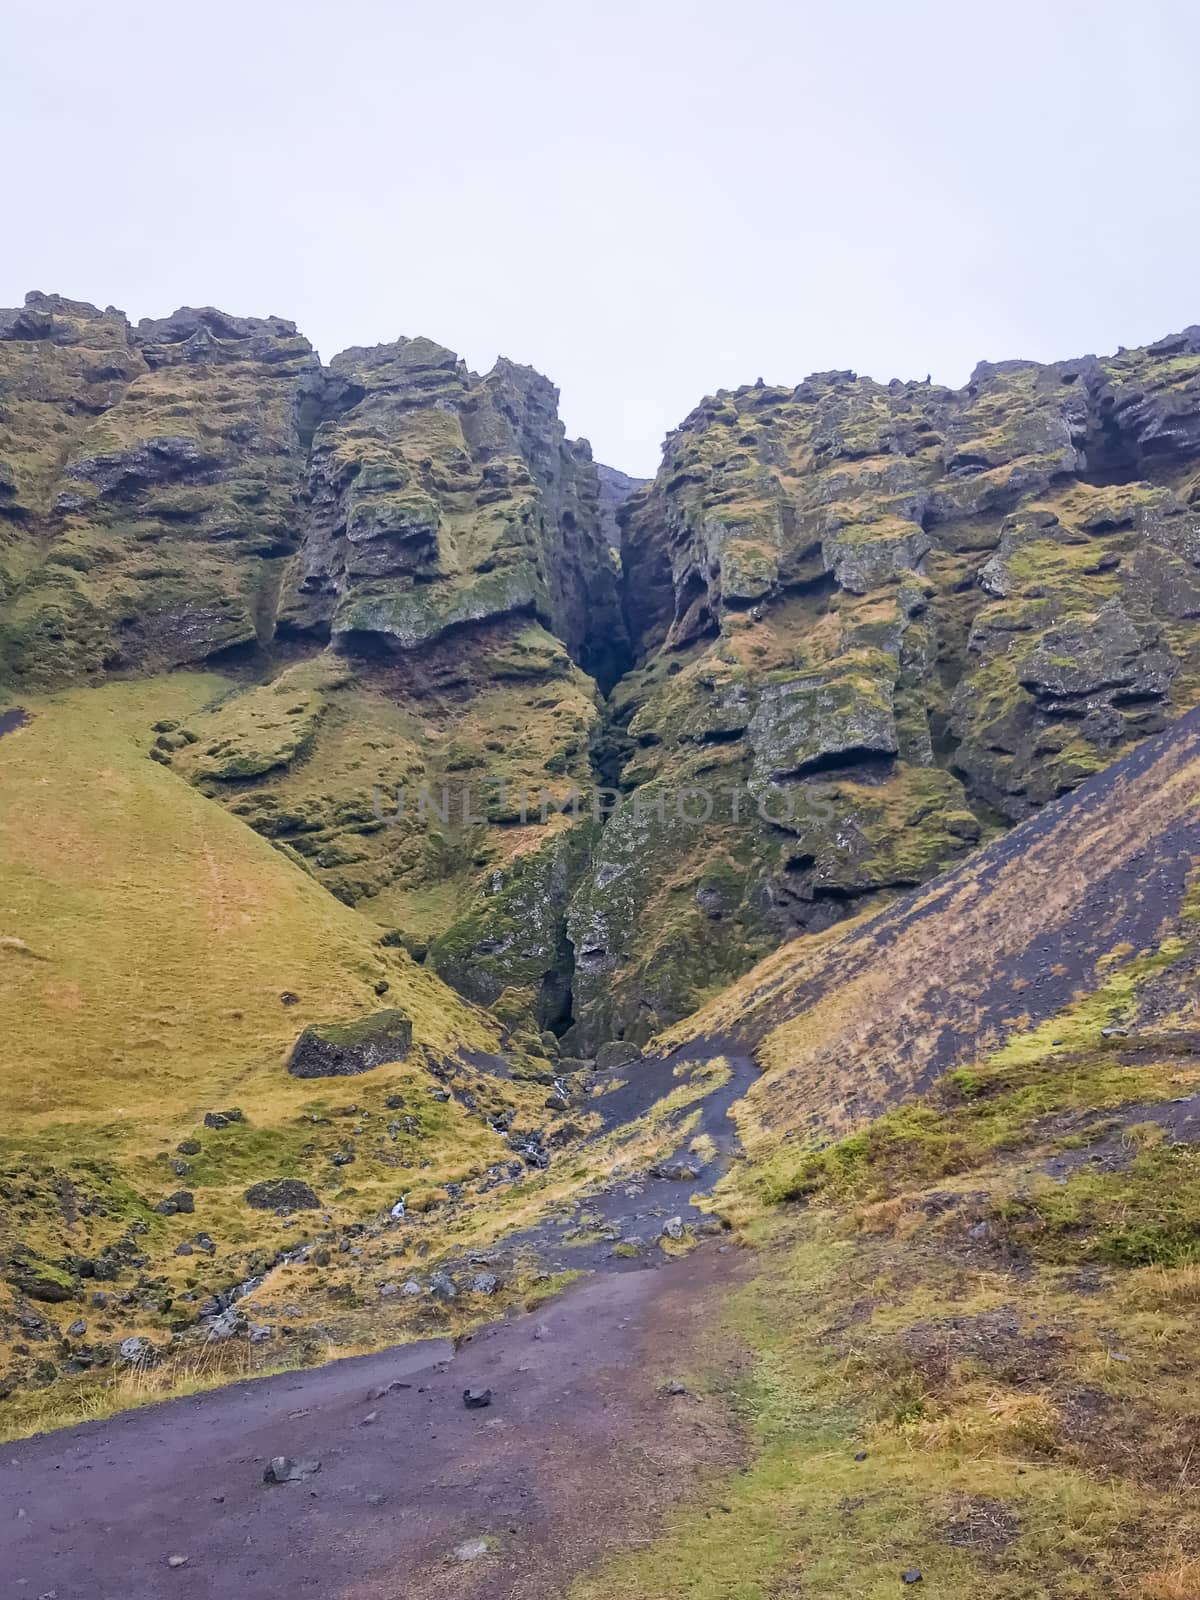 Snaefellsness national park in Iceland Raudfeldsgja gorge deep crack in mountain by MXW_Stock